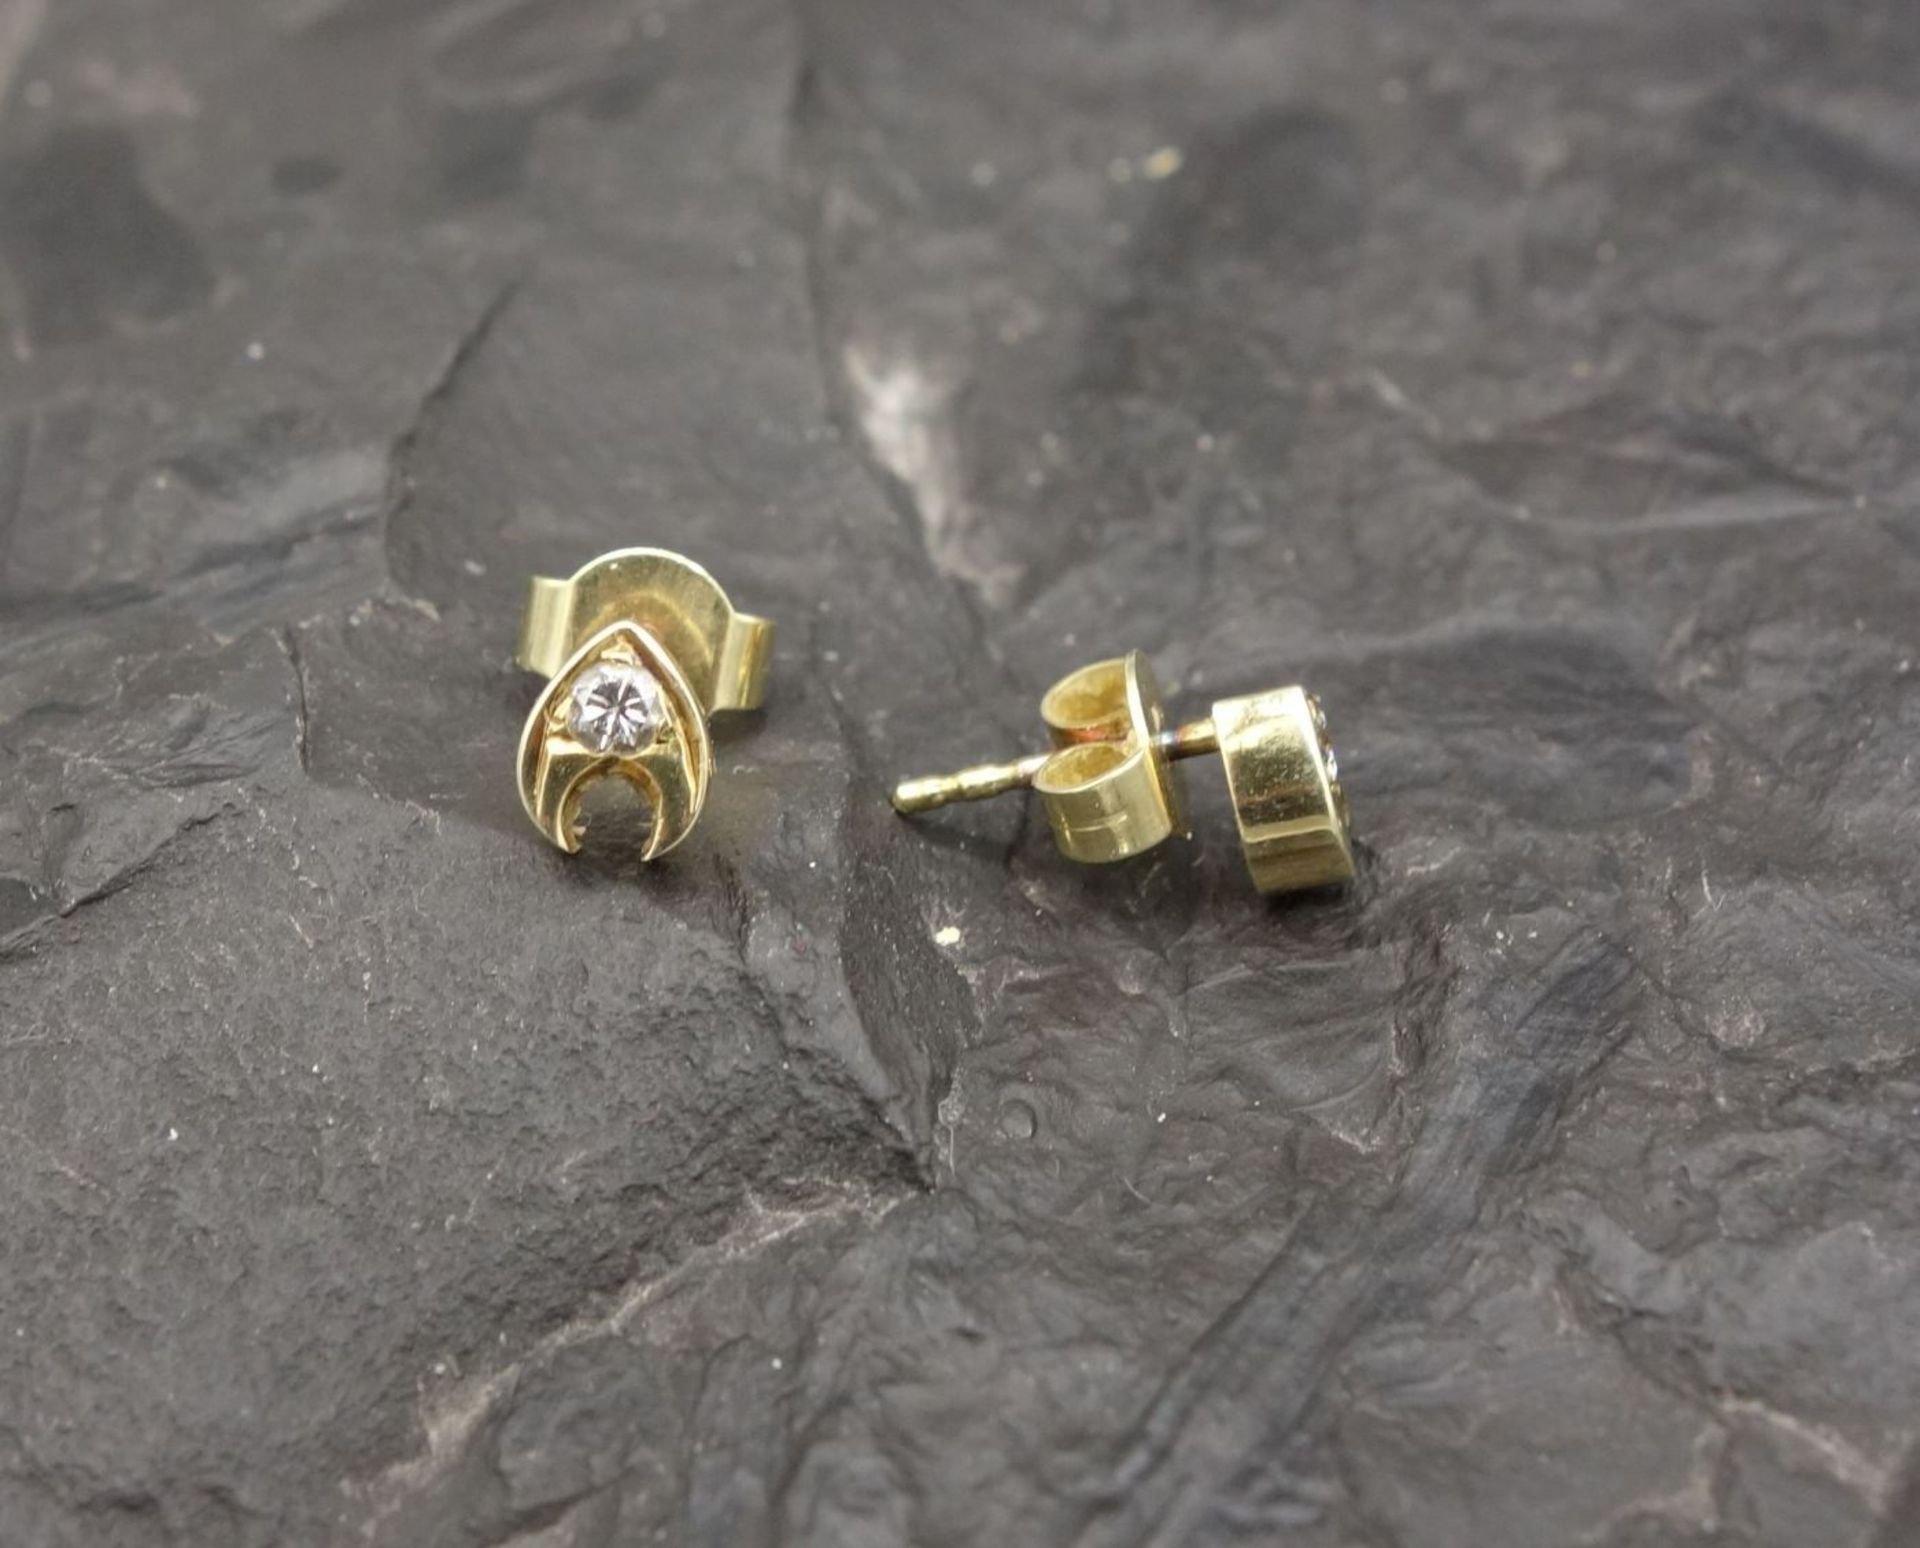 EAR STUDS - Image 3 of 3